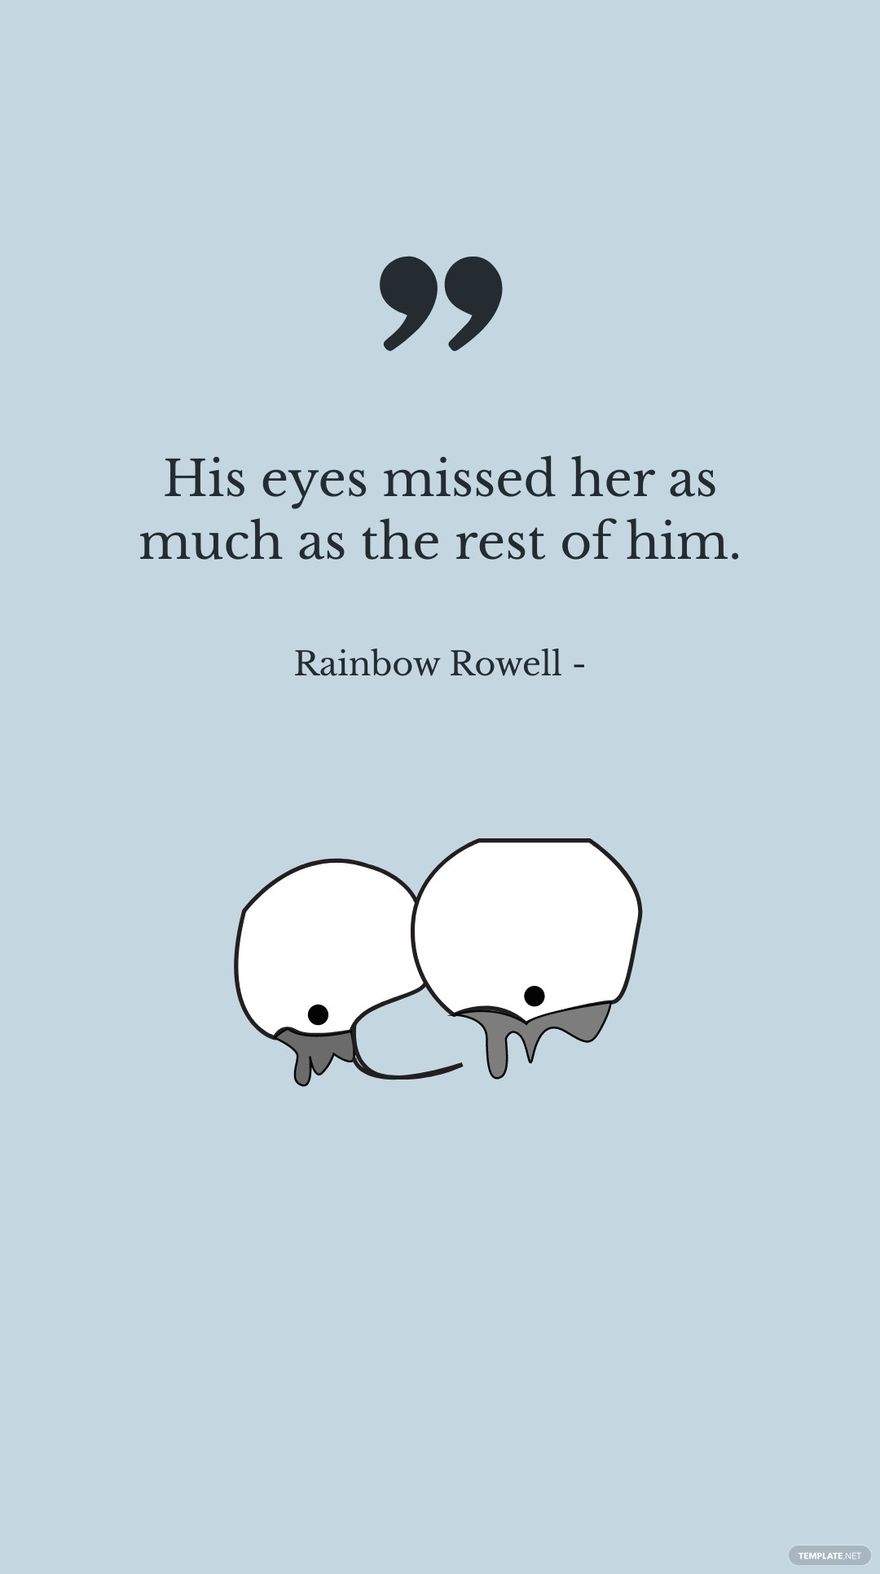 Free Rainbow Rowell - His eyes missed her as much as the rest of him. in JPG